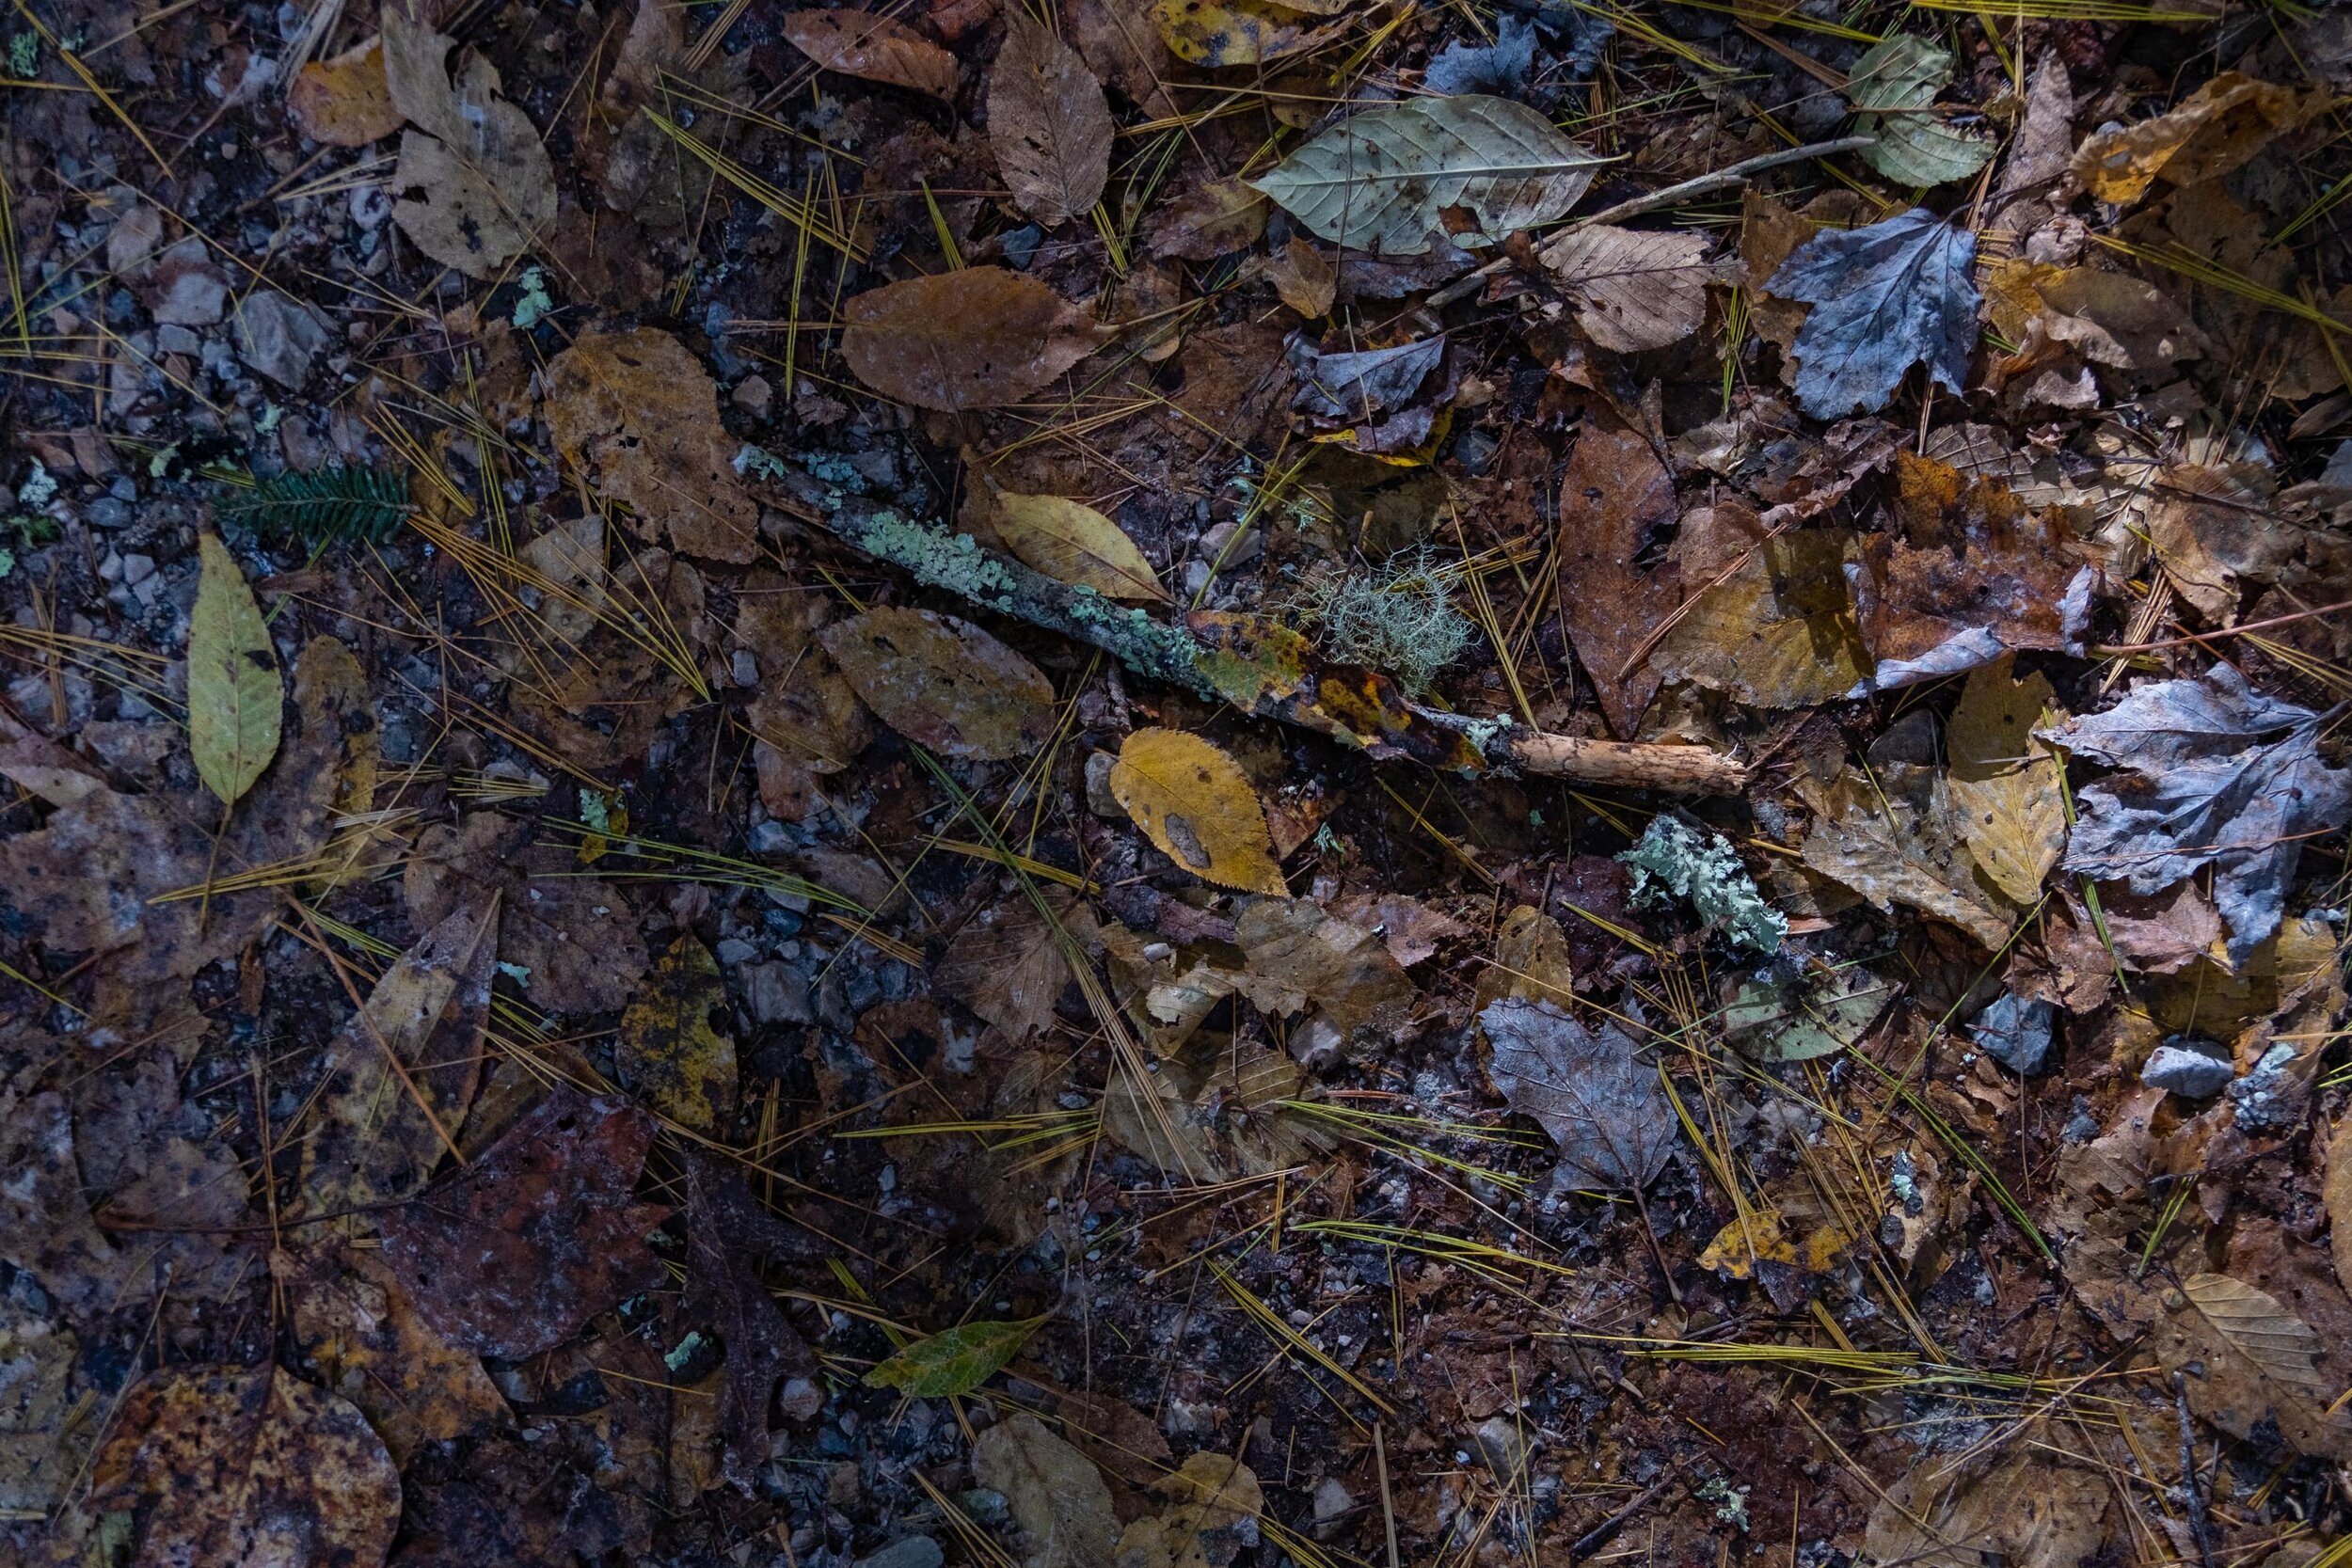 On the Forest Floor - Linville Falls Blue Ridge Pkwy N.C.